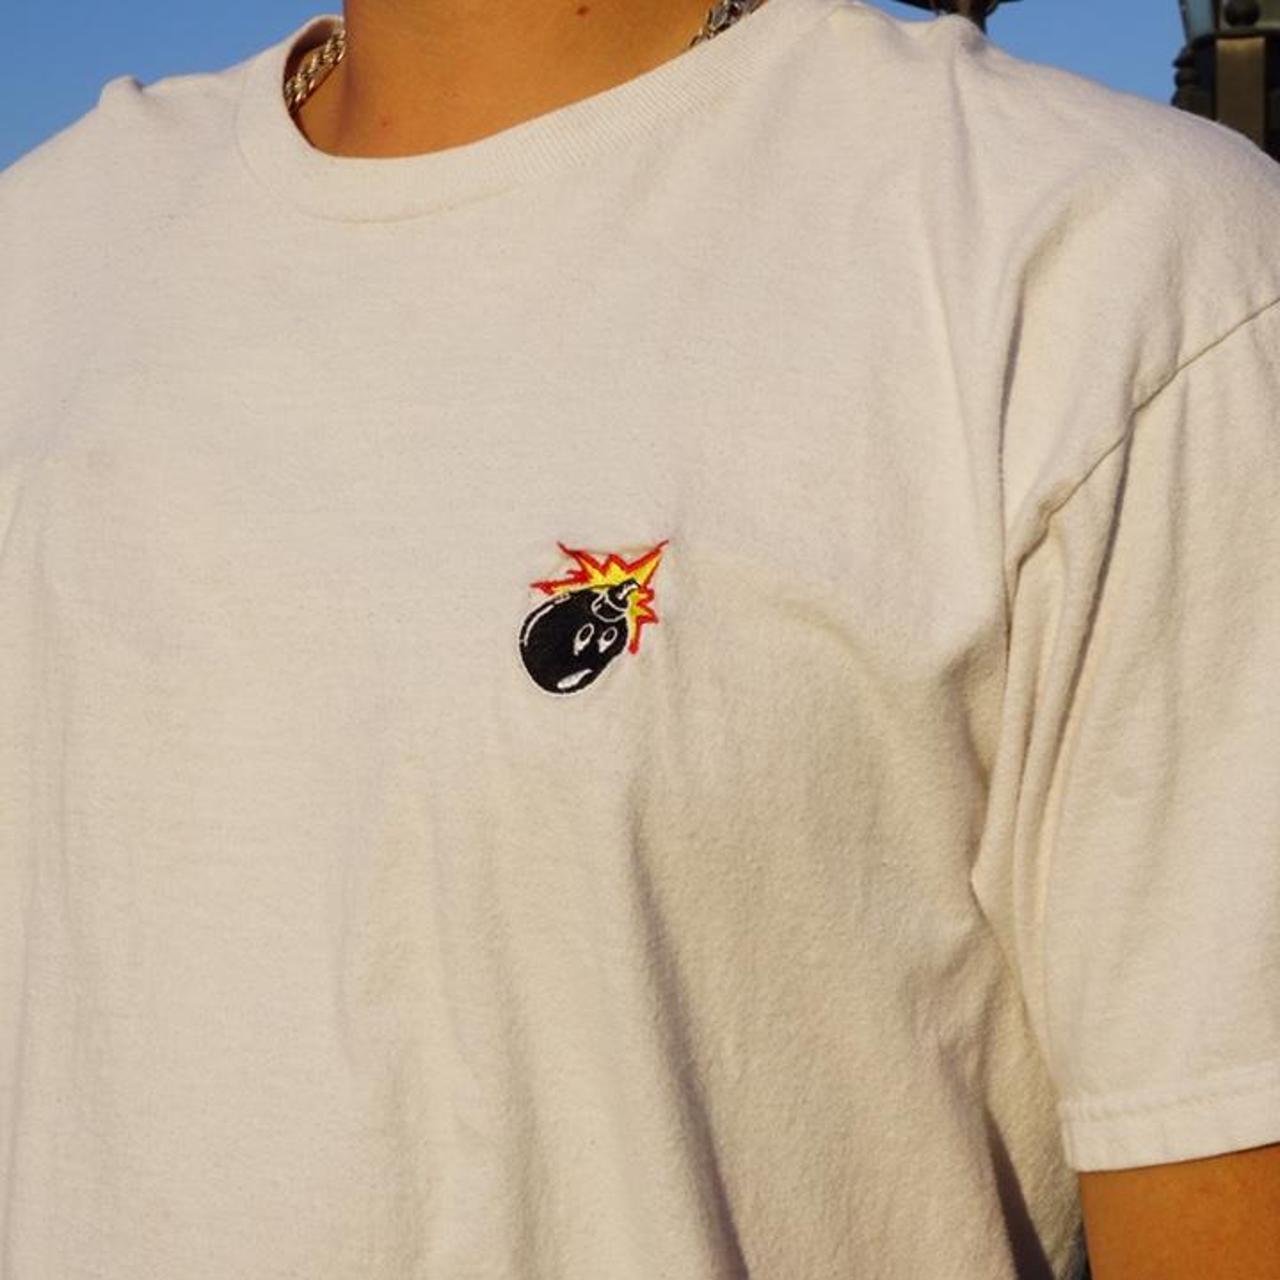 Product Image 2 - The Hundreds Tee

Embroidered Classic Bomb